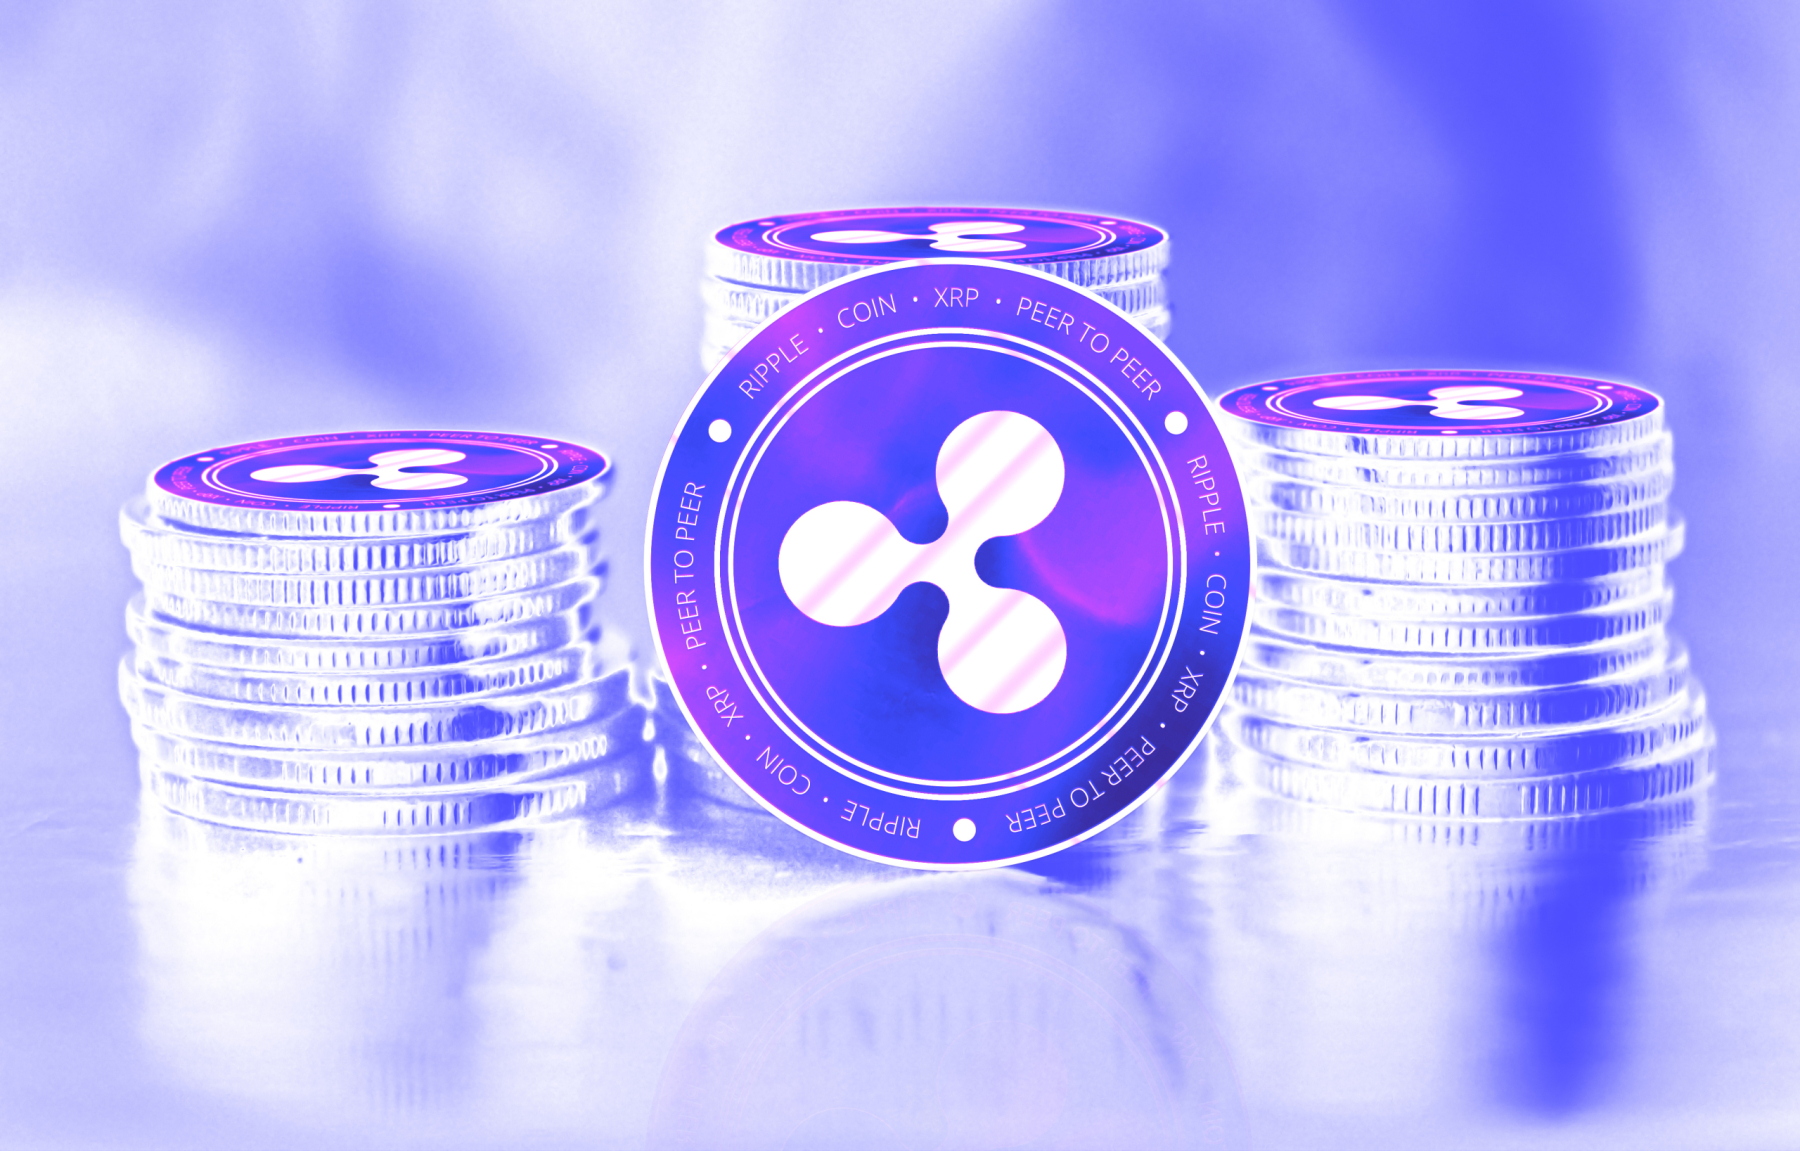 XRP Price Surpasses Previous Predictions 2023 - Could Ripple Hit Euro 1 in 2nd Half of This Year?
